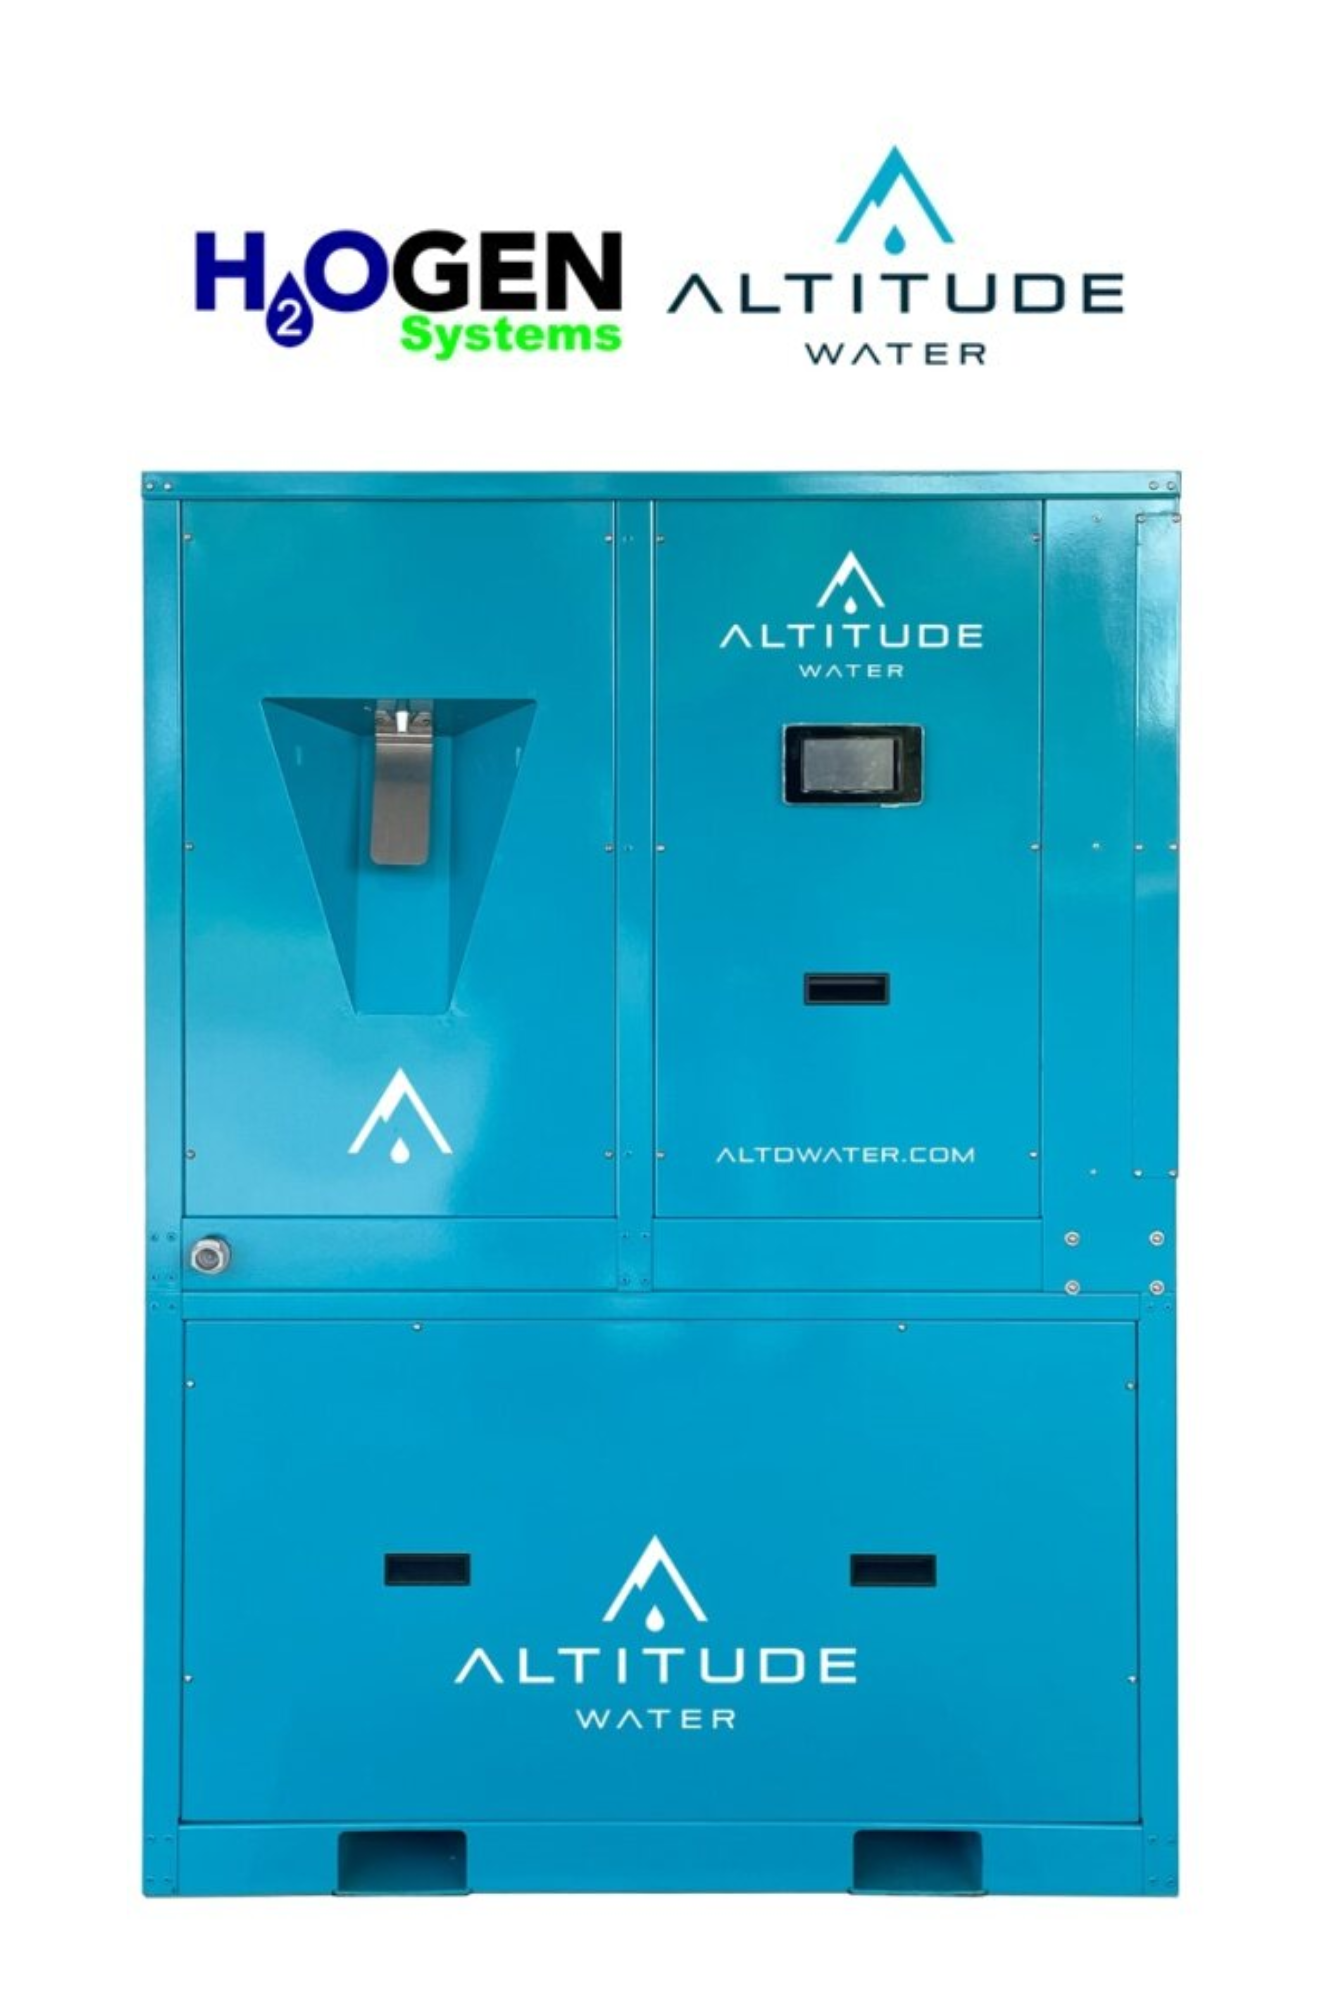 Hogen Systems and Altitude Water joint logo with an image of an Atmospheric Water Generator (AWG)